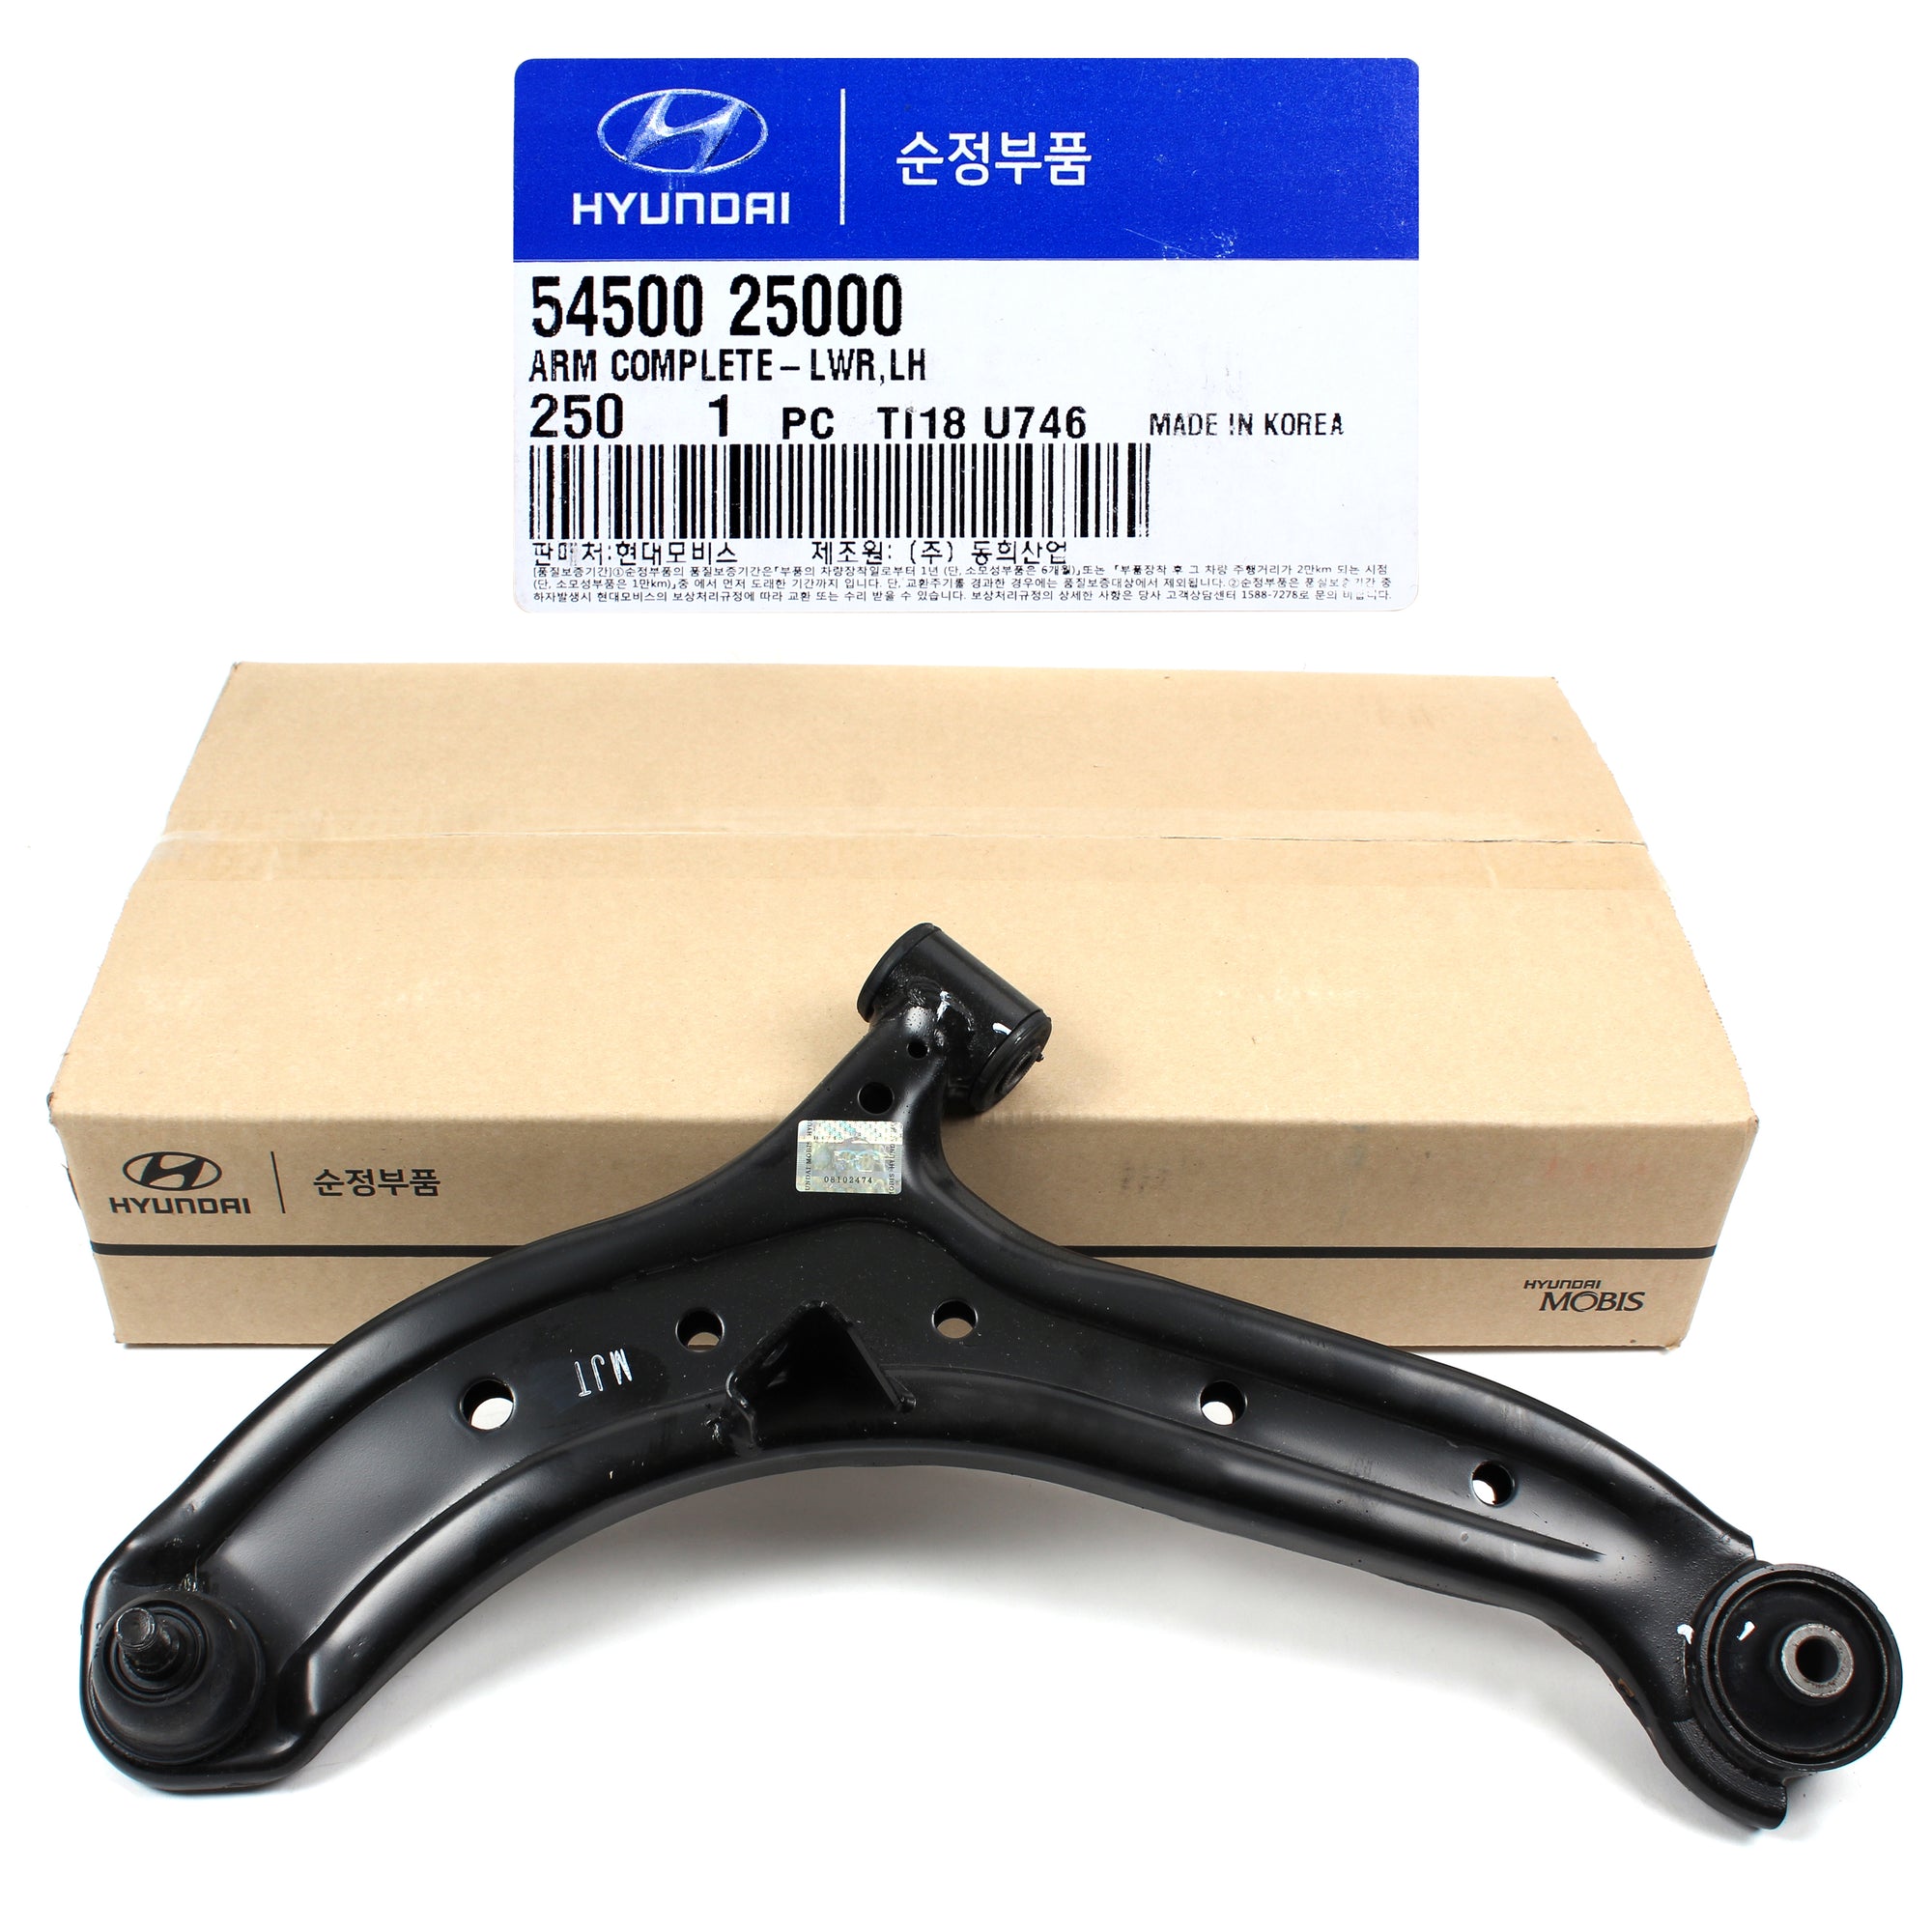 GENUINE Control Arm Lower FRONT LEFT LH for 00-06 Hyundai Accent 5450025000